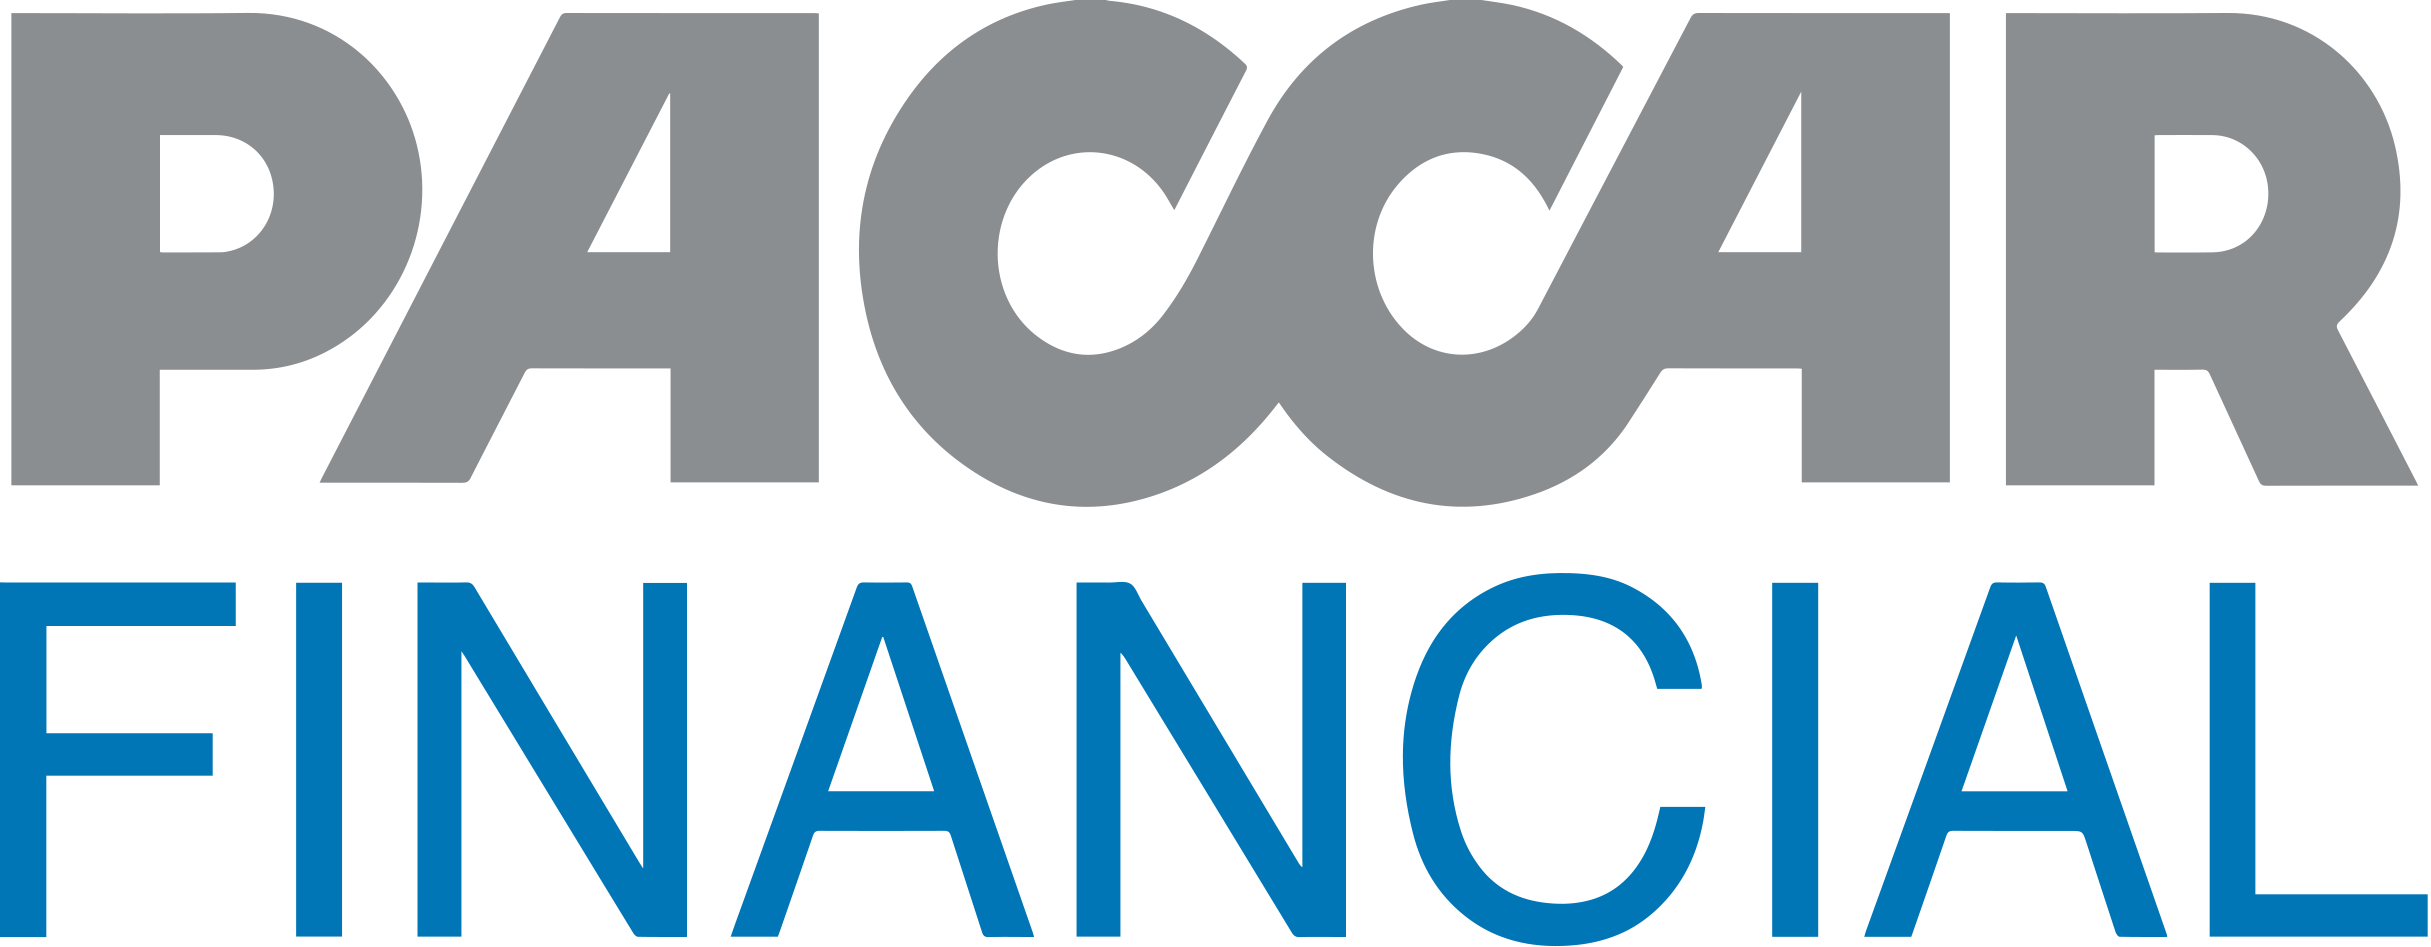 Financail PACCAR Logo - List of Synonyms and Antonyms of the Word: Paccar Logo